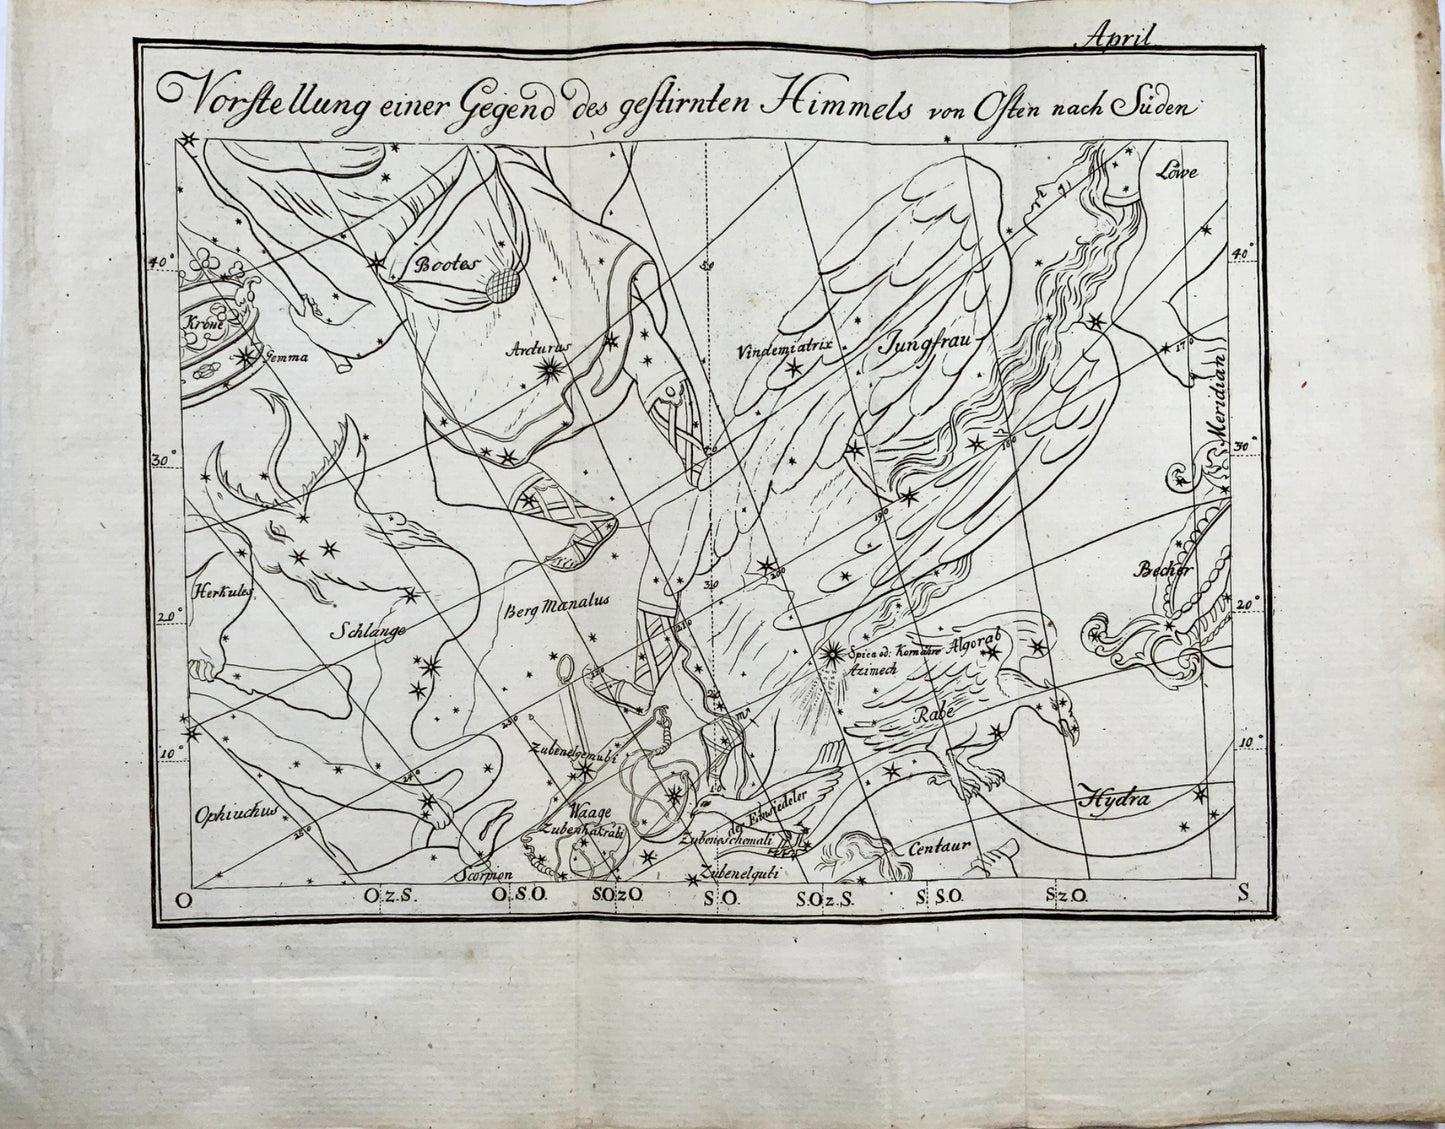 1777 Celestial Chart viewed in April, Joh. E. Bode, map